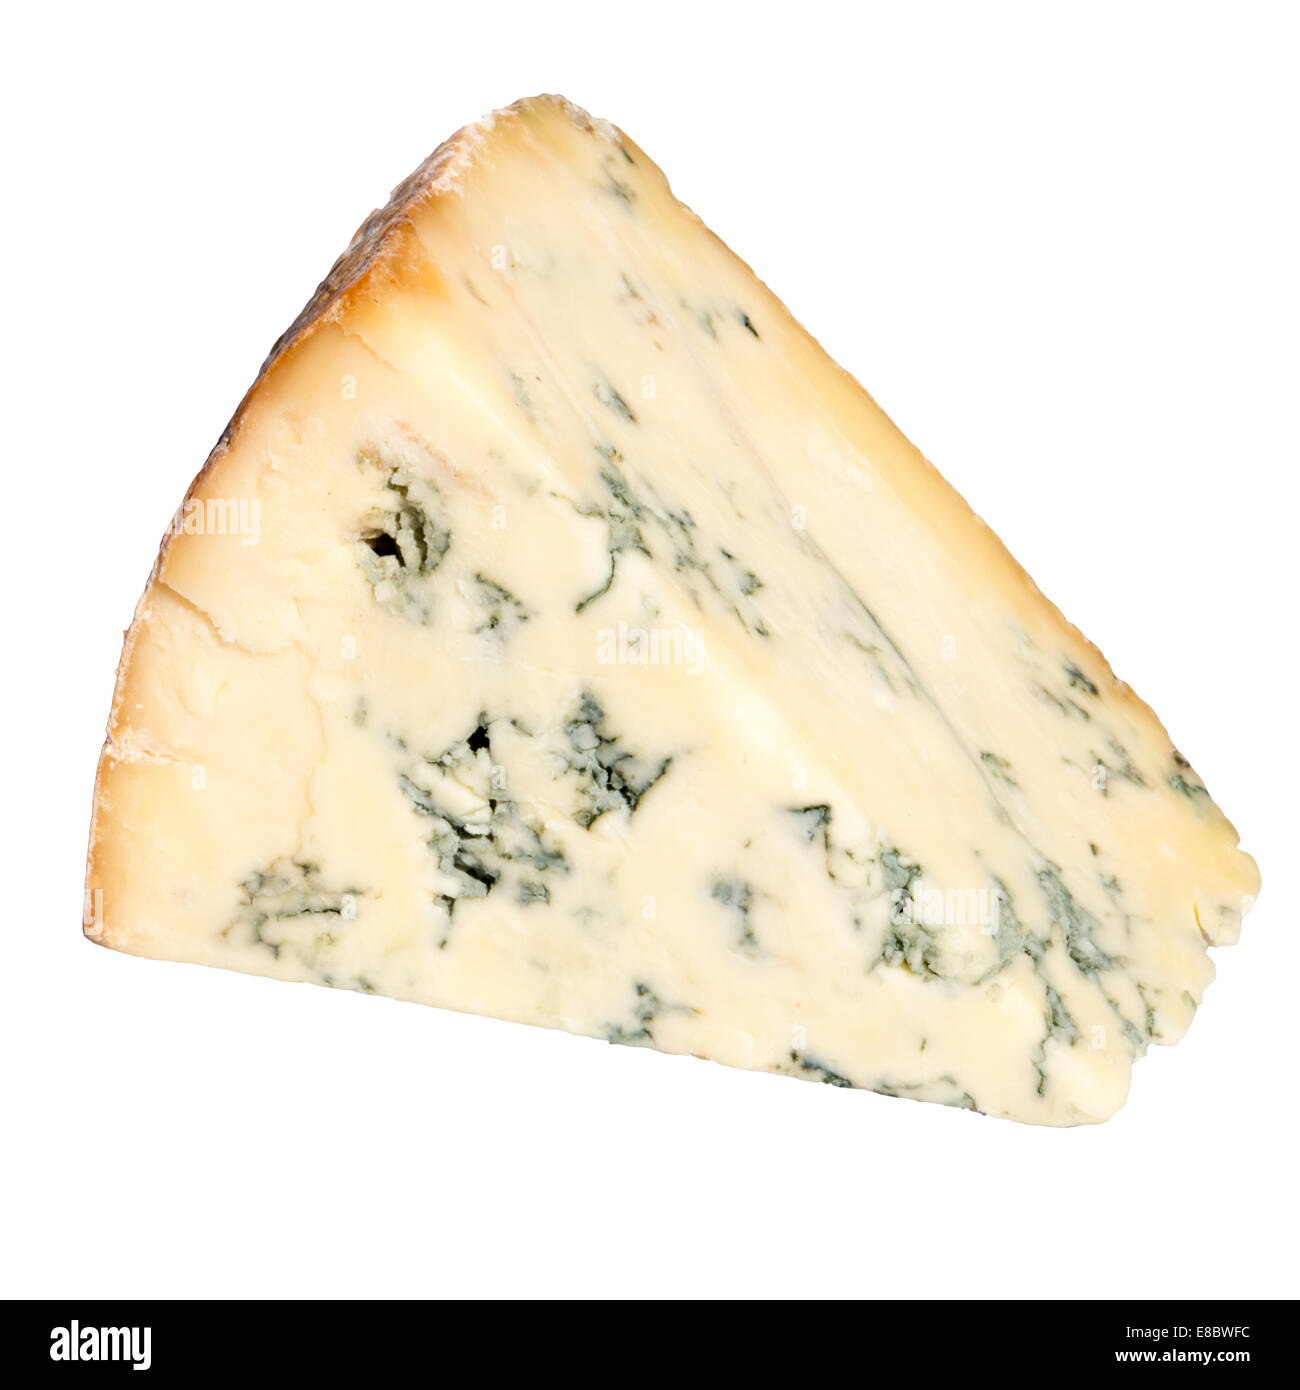 Wedge of blue Stilton cheese cut out or isolated on a white background. Stock Photo